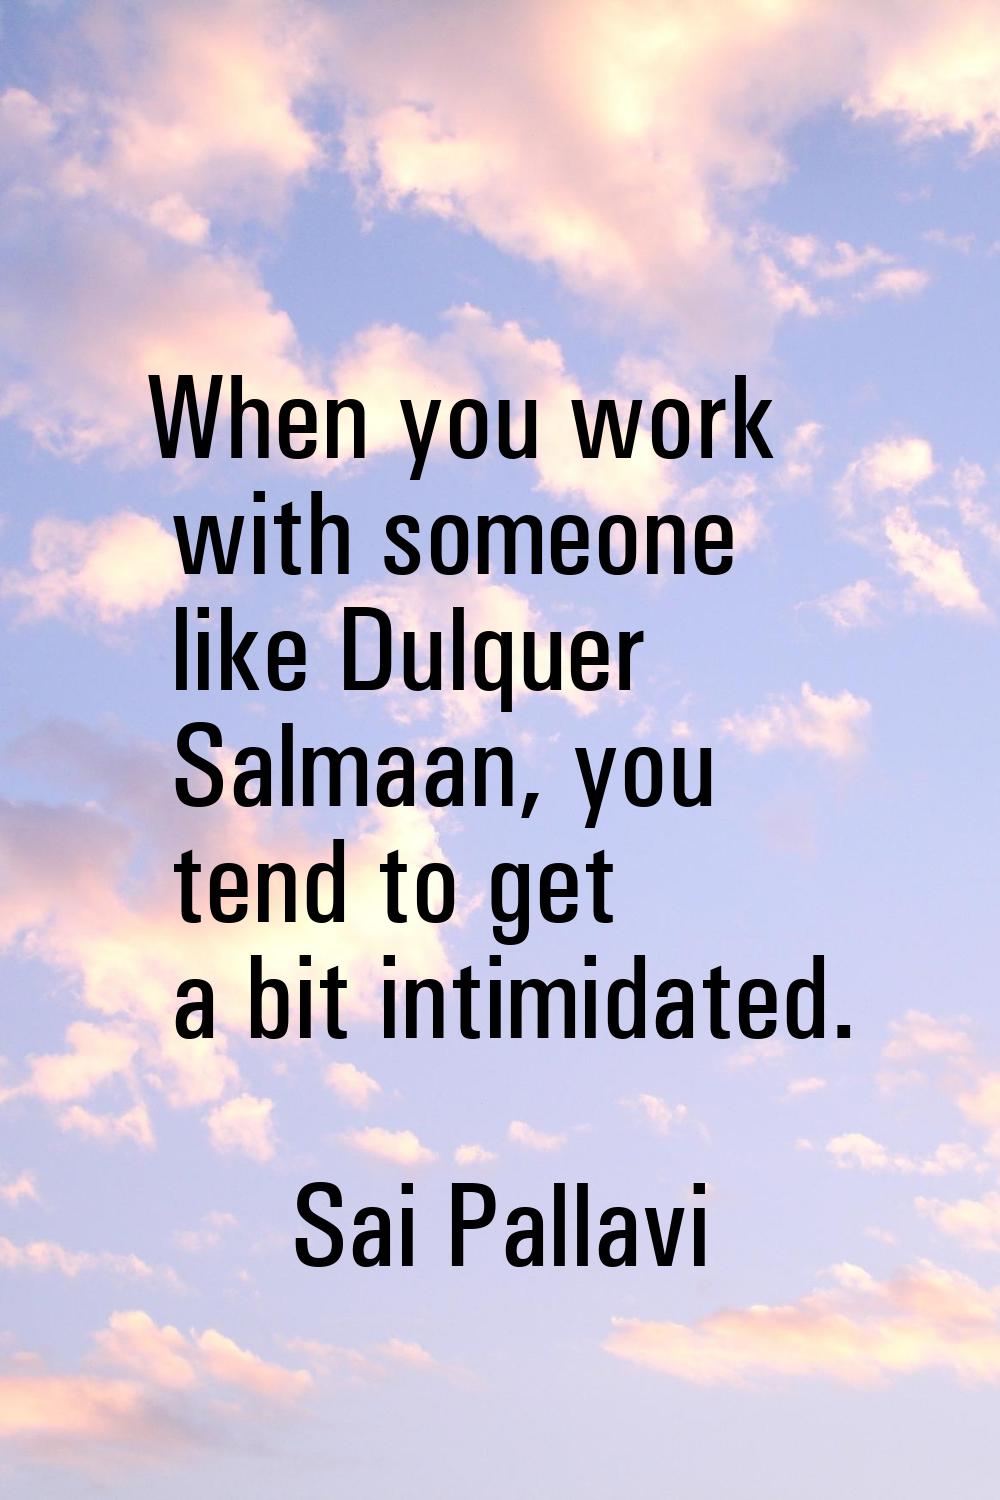 When you work with someone like Dulquer Salmaan, you tend to get a bit intimidated.